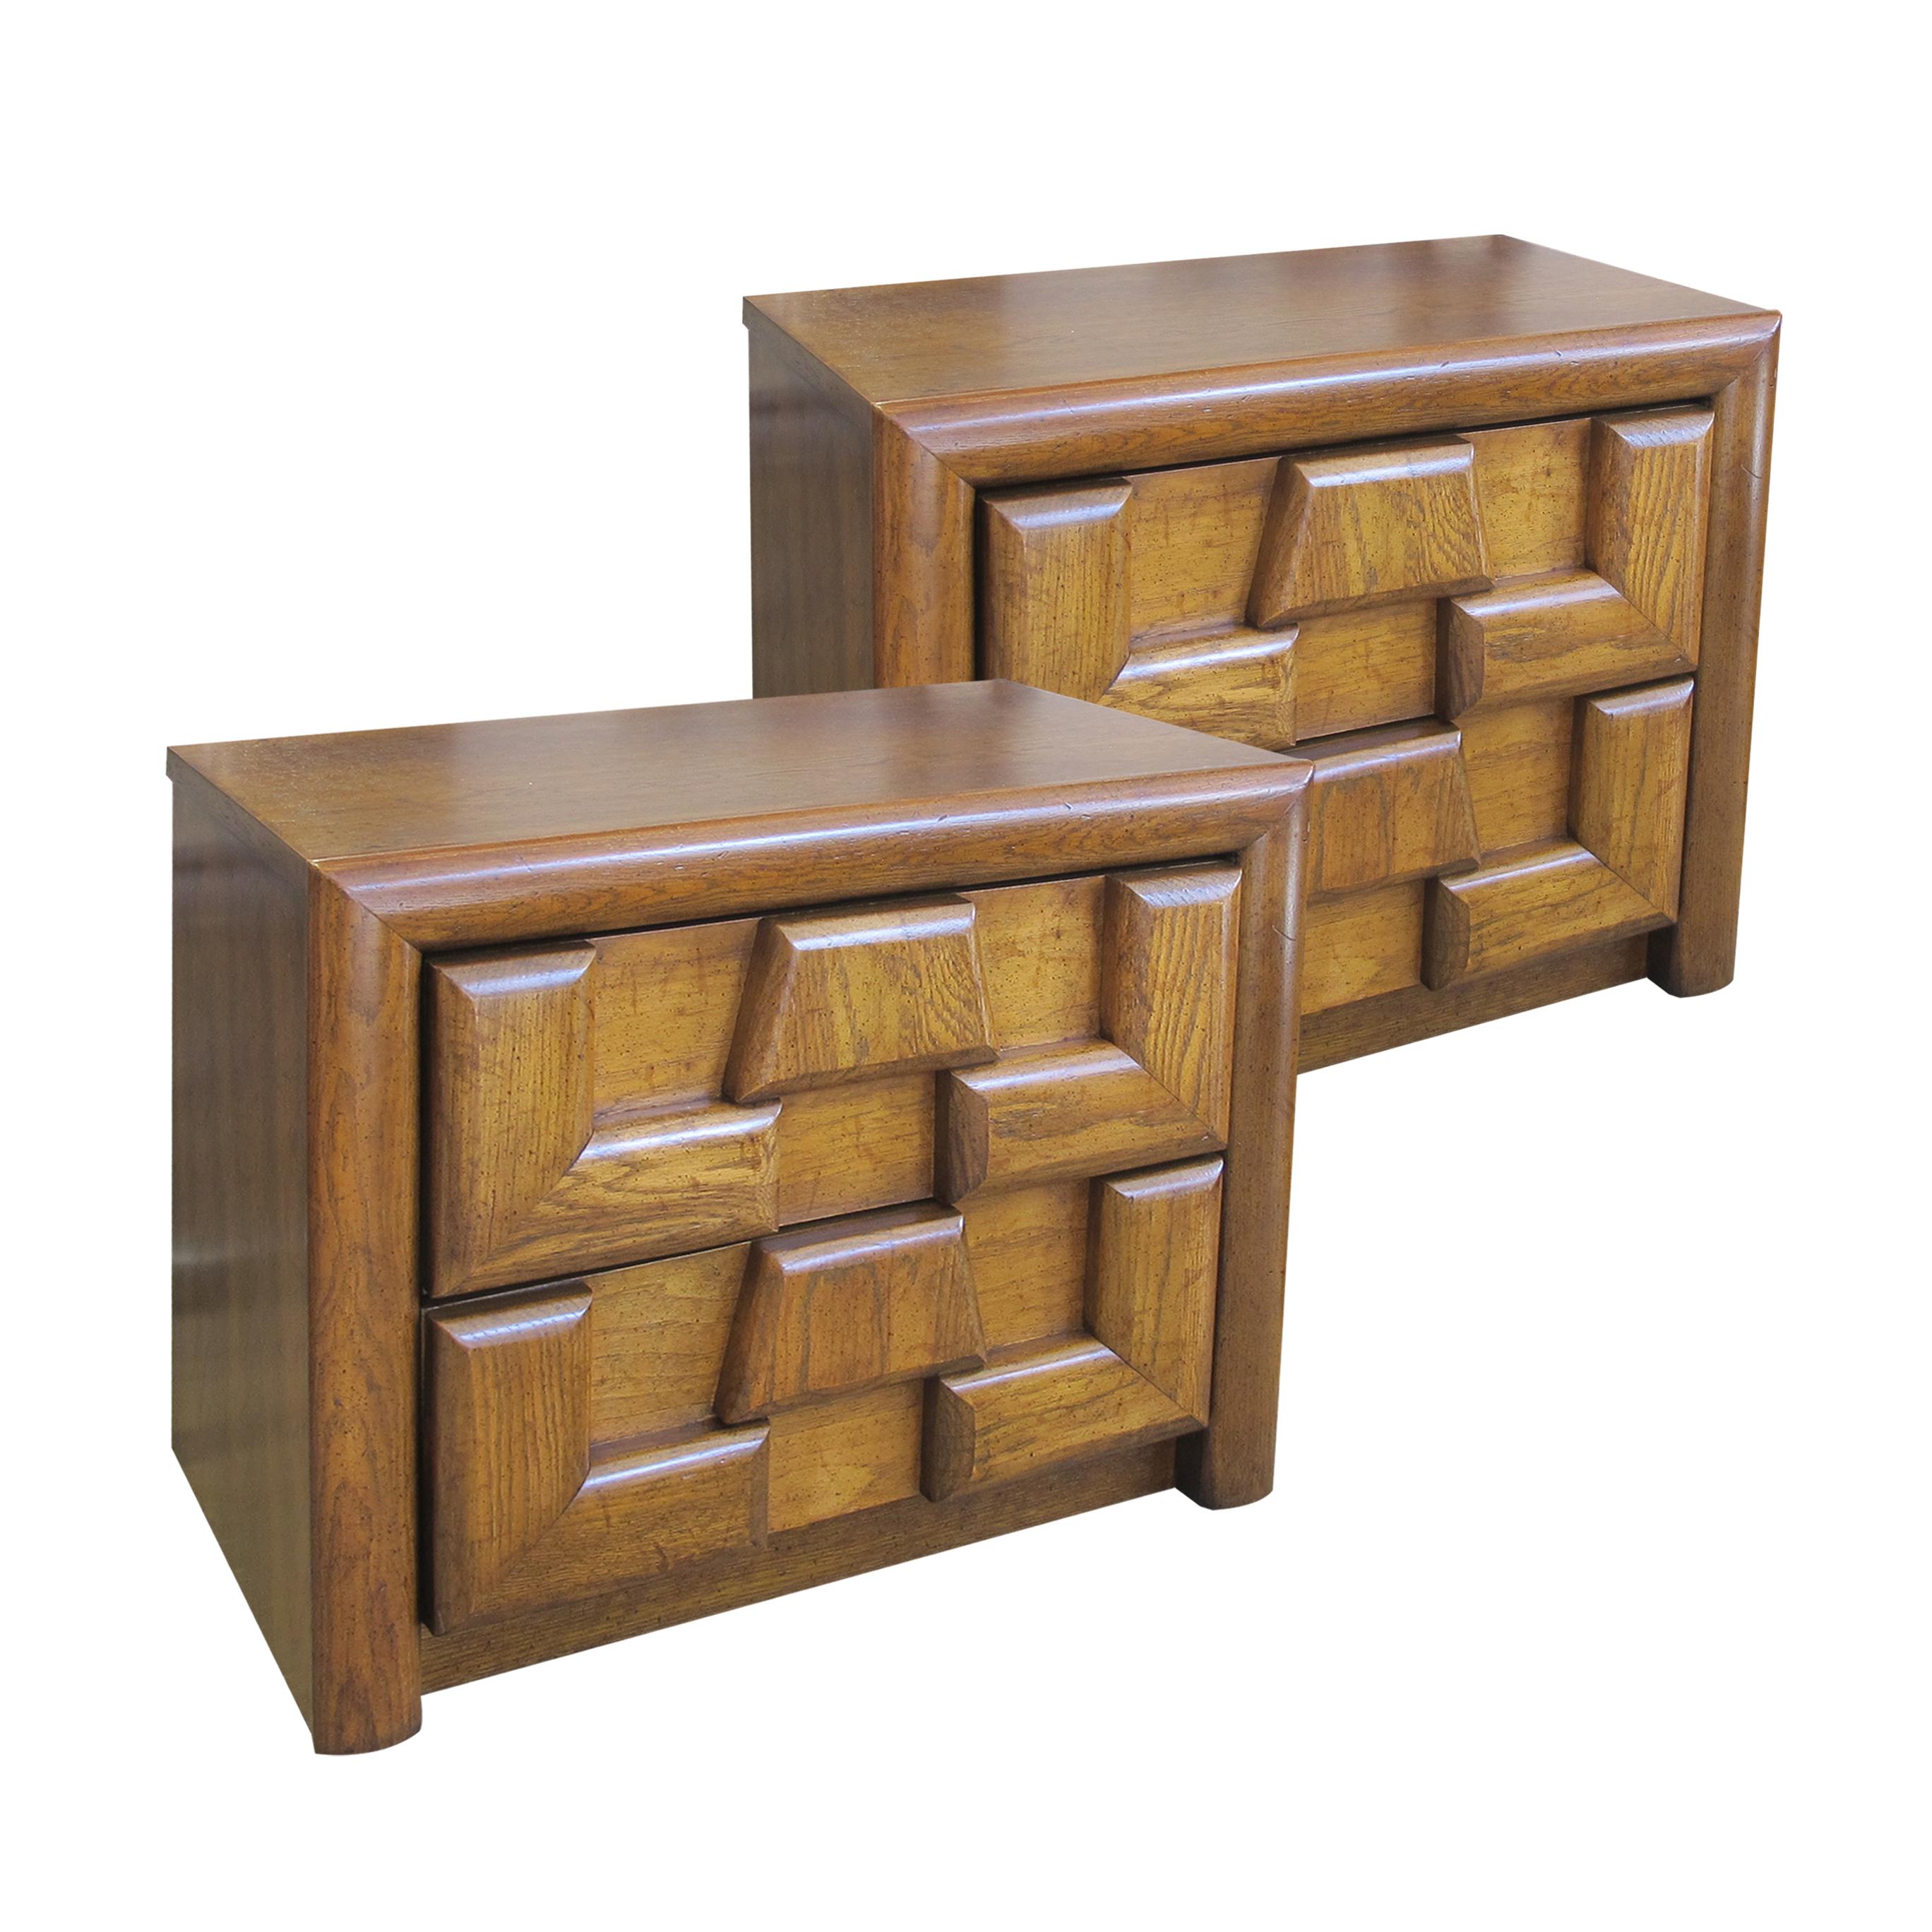 Other Pair of 1960s American Brutalist Walnut Two Drawer Bedside/End Tables by Lane 